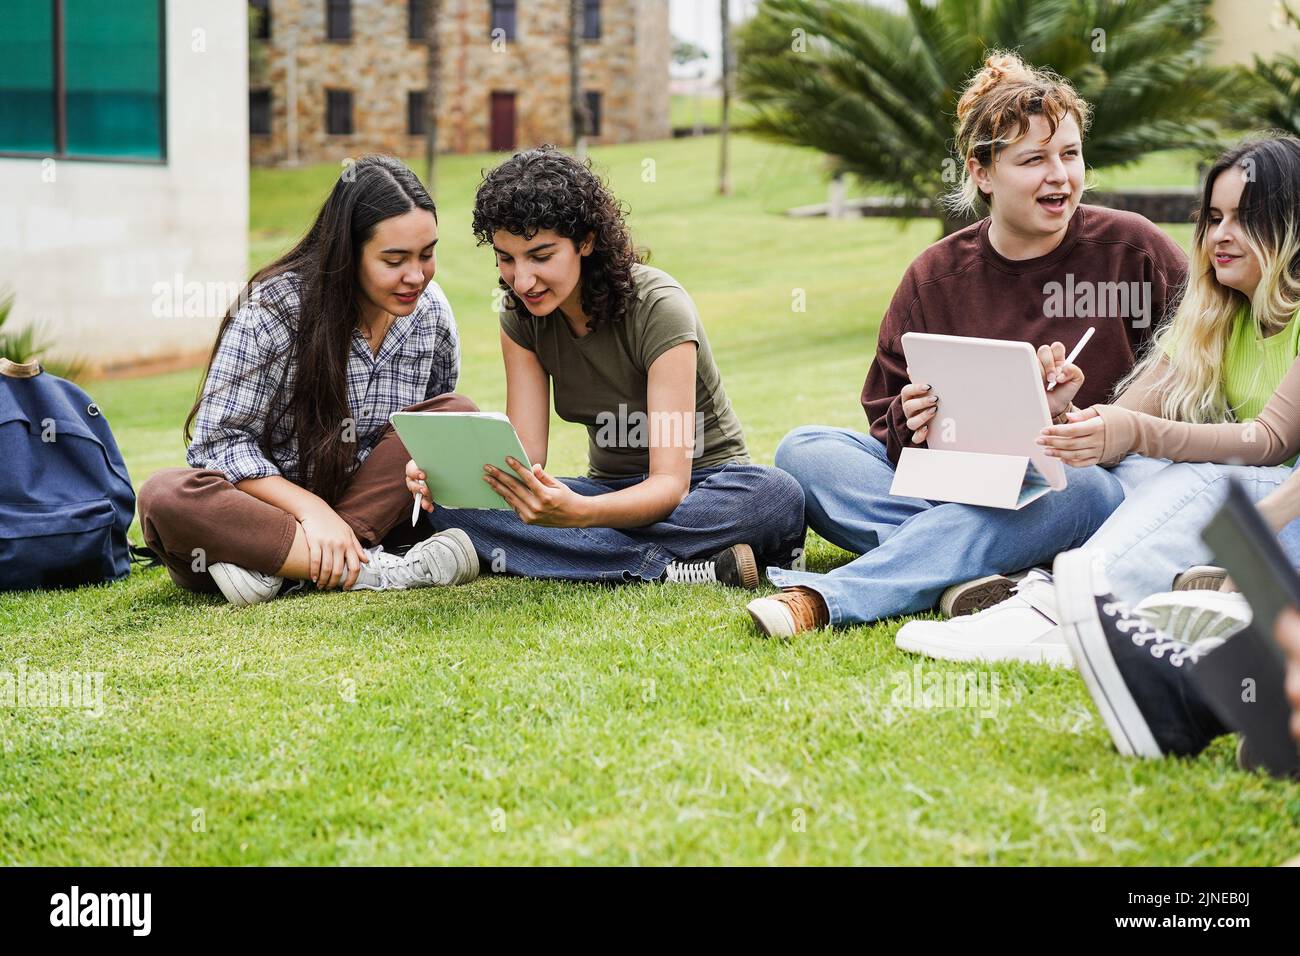 Young friends studying together outdoor sitting in university campus park - Focus on left girls faces Stock Photo